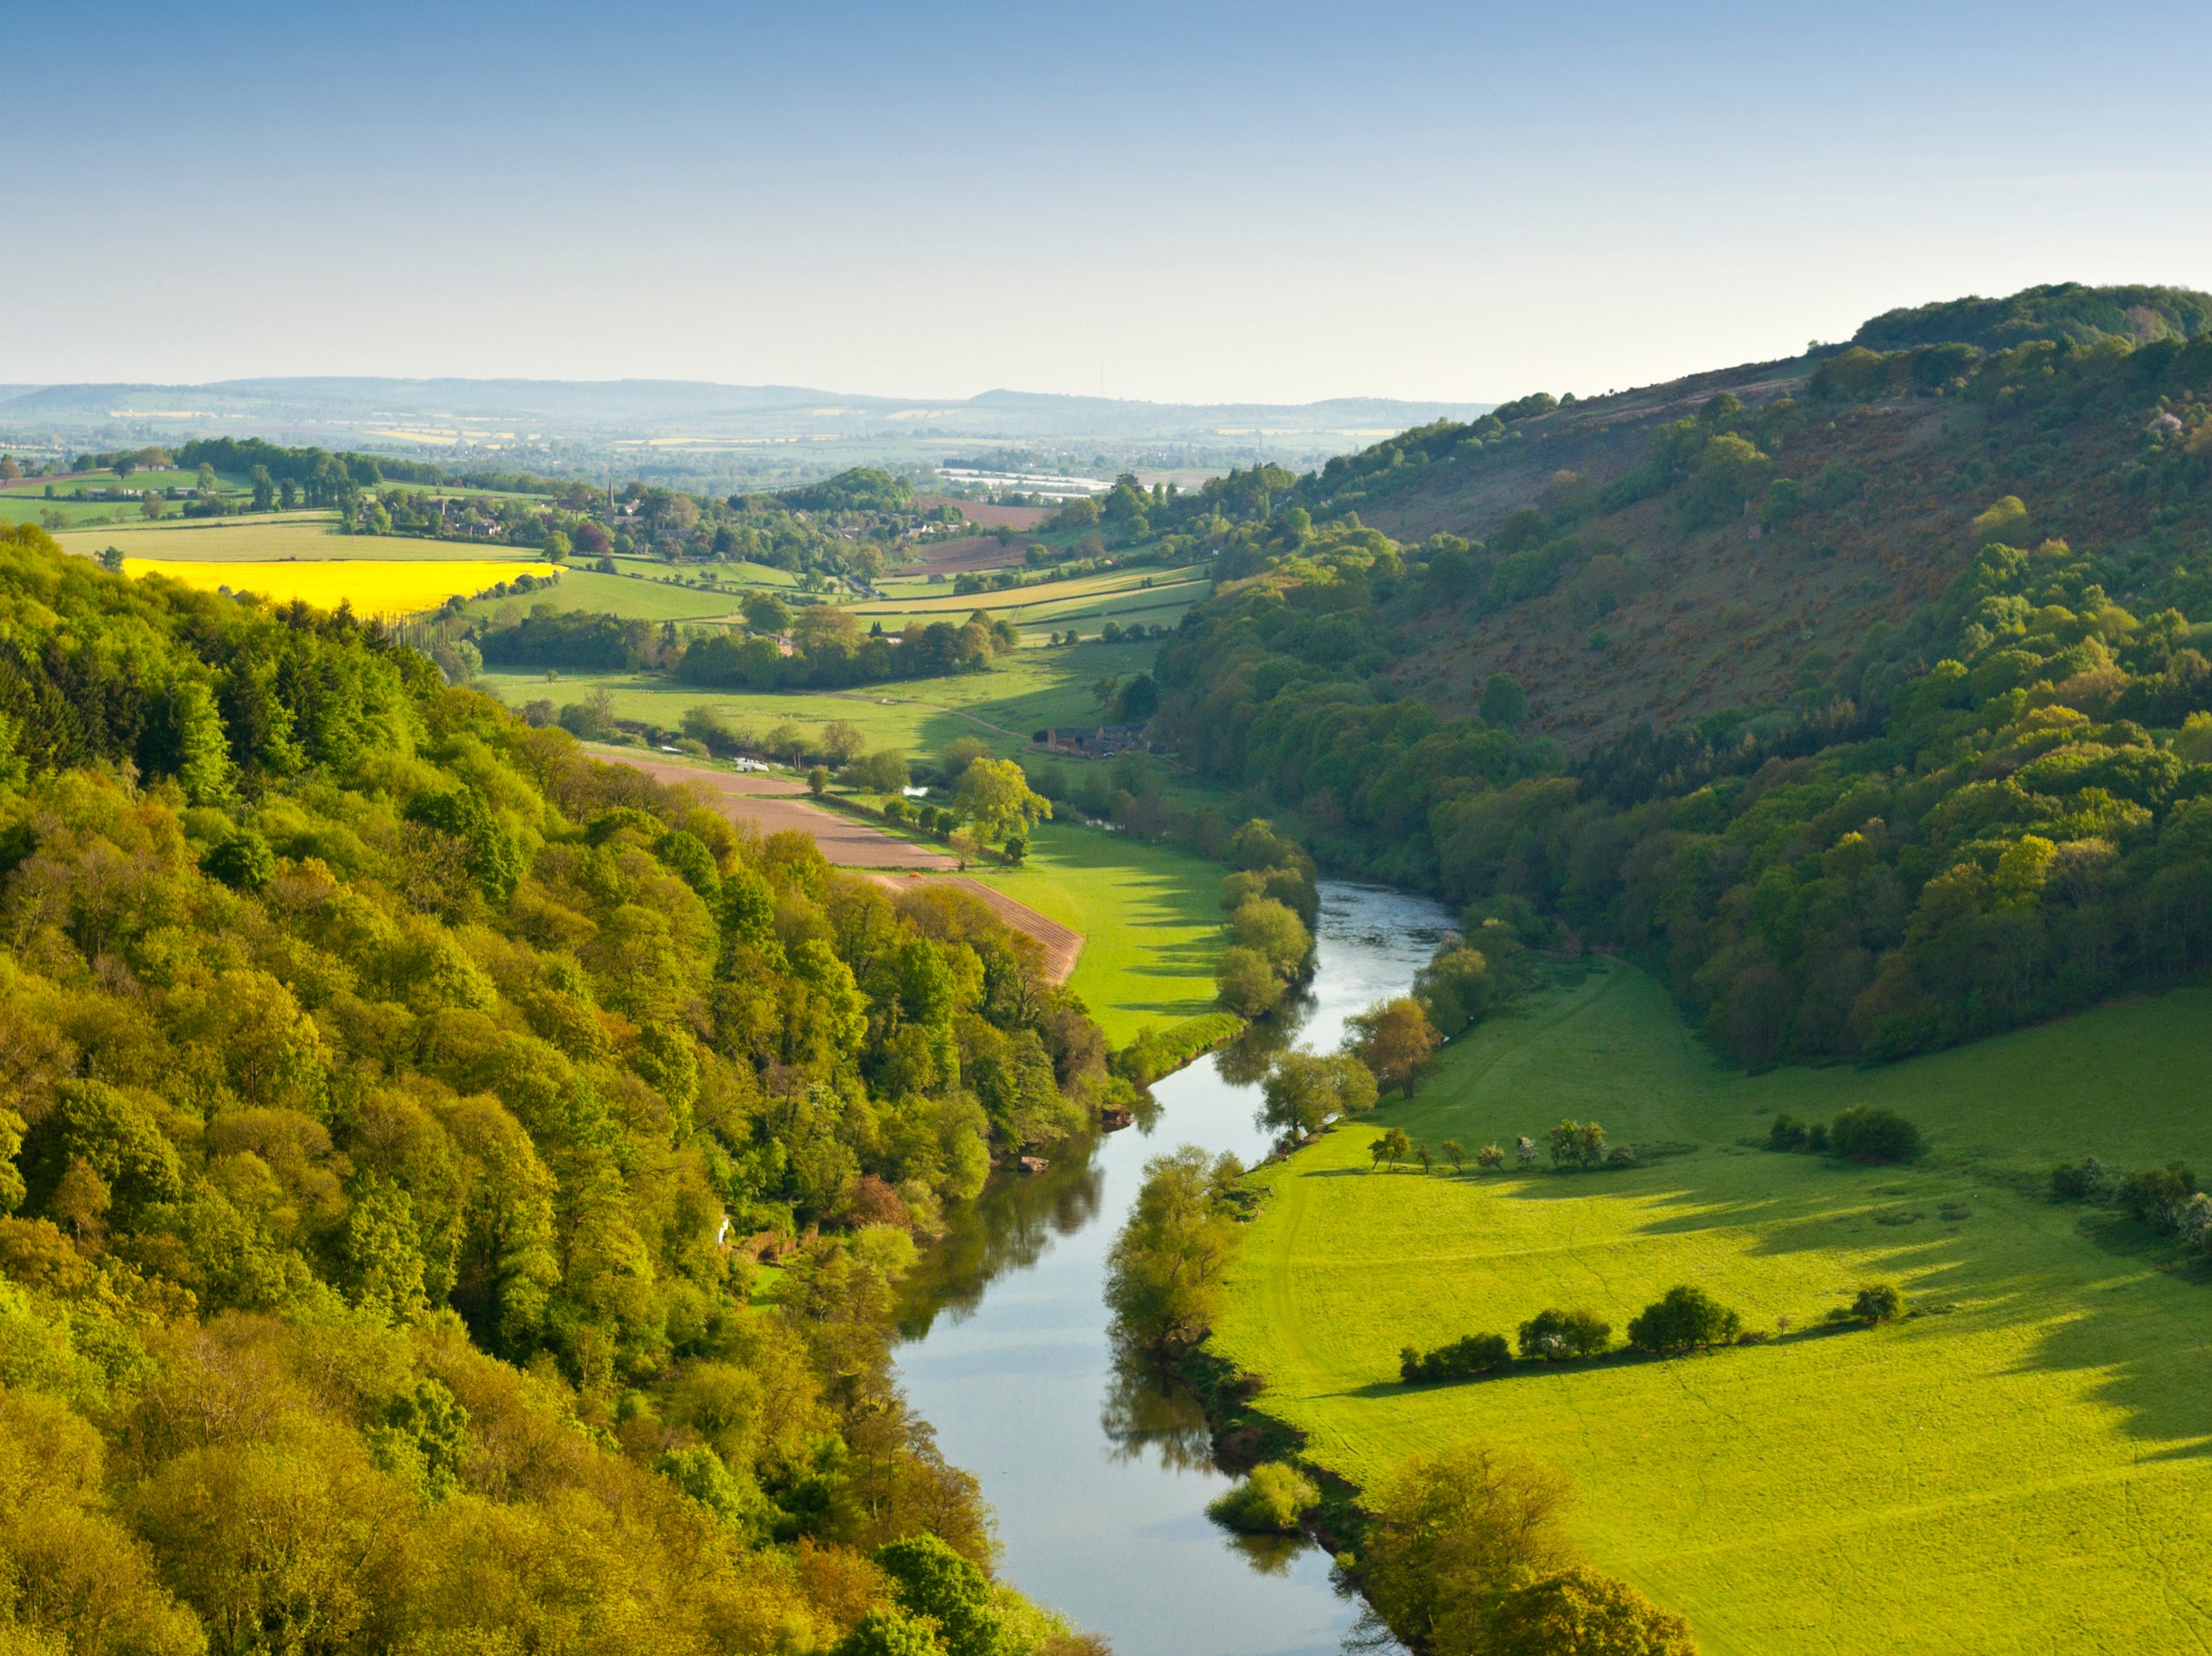 Large areas of new woodlands are set to be planted from Devon to Cumbria as part of the government’s ‘Woodlands for Water’ project